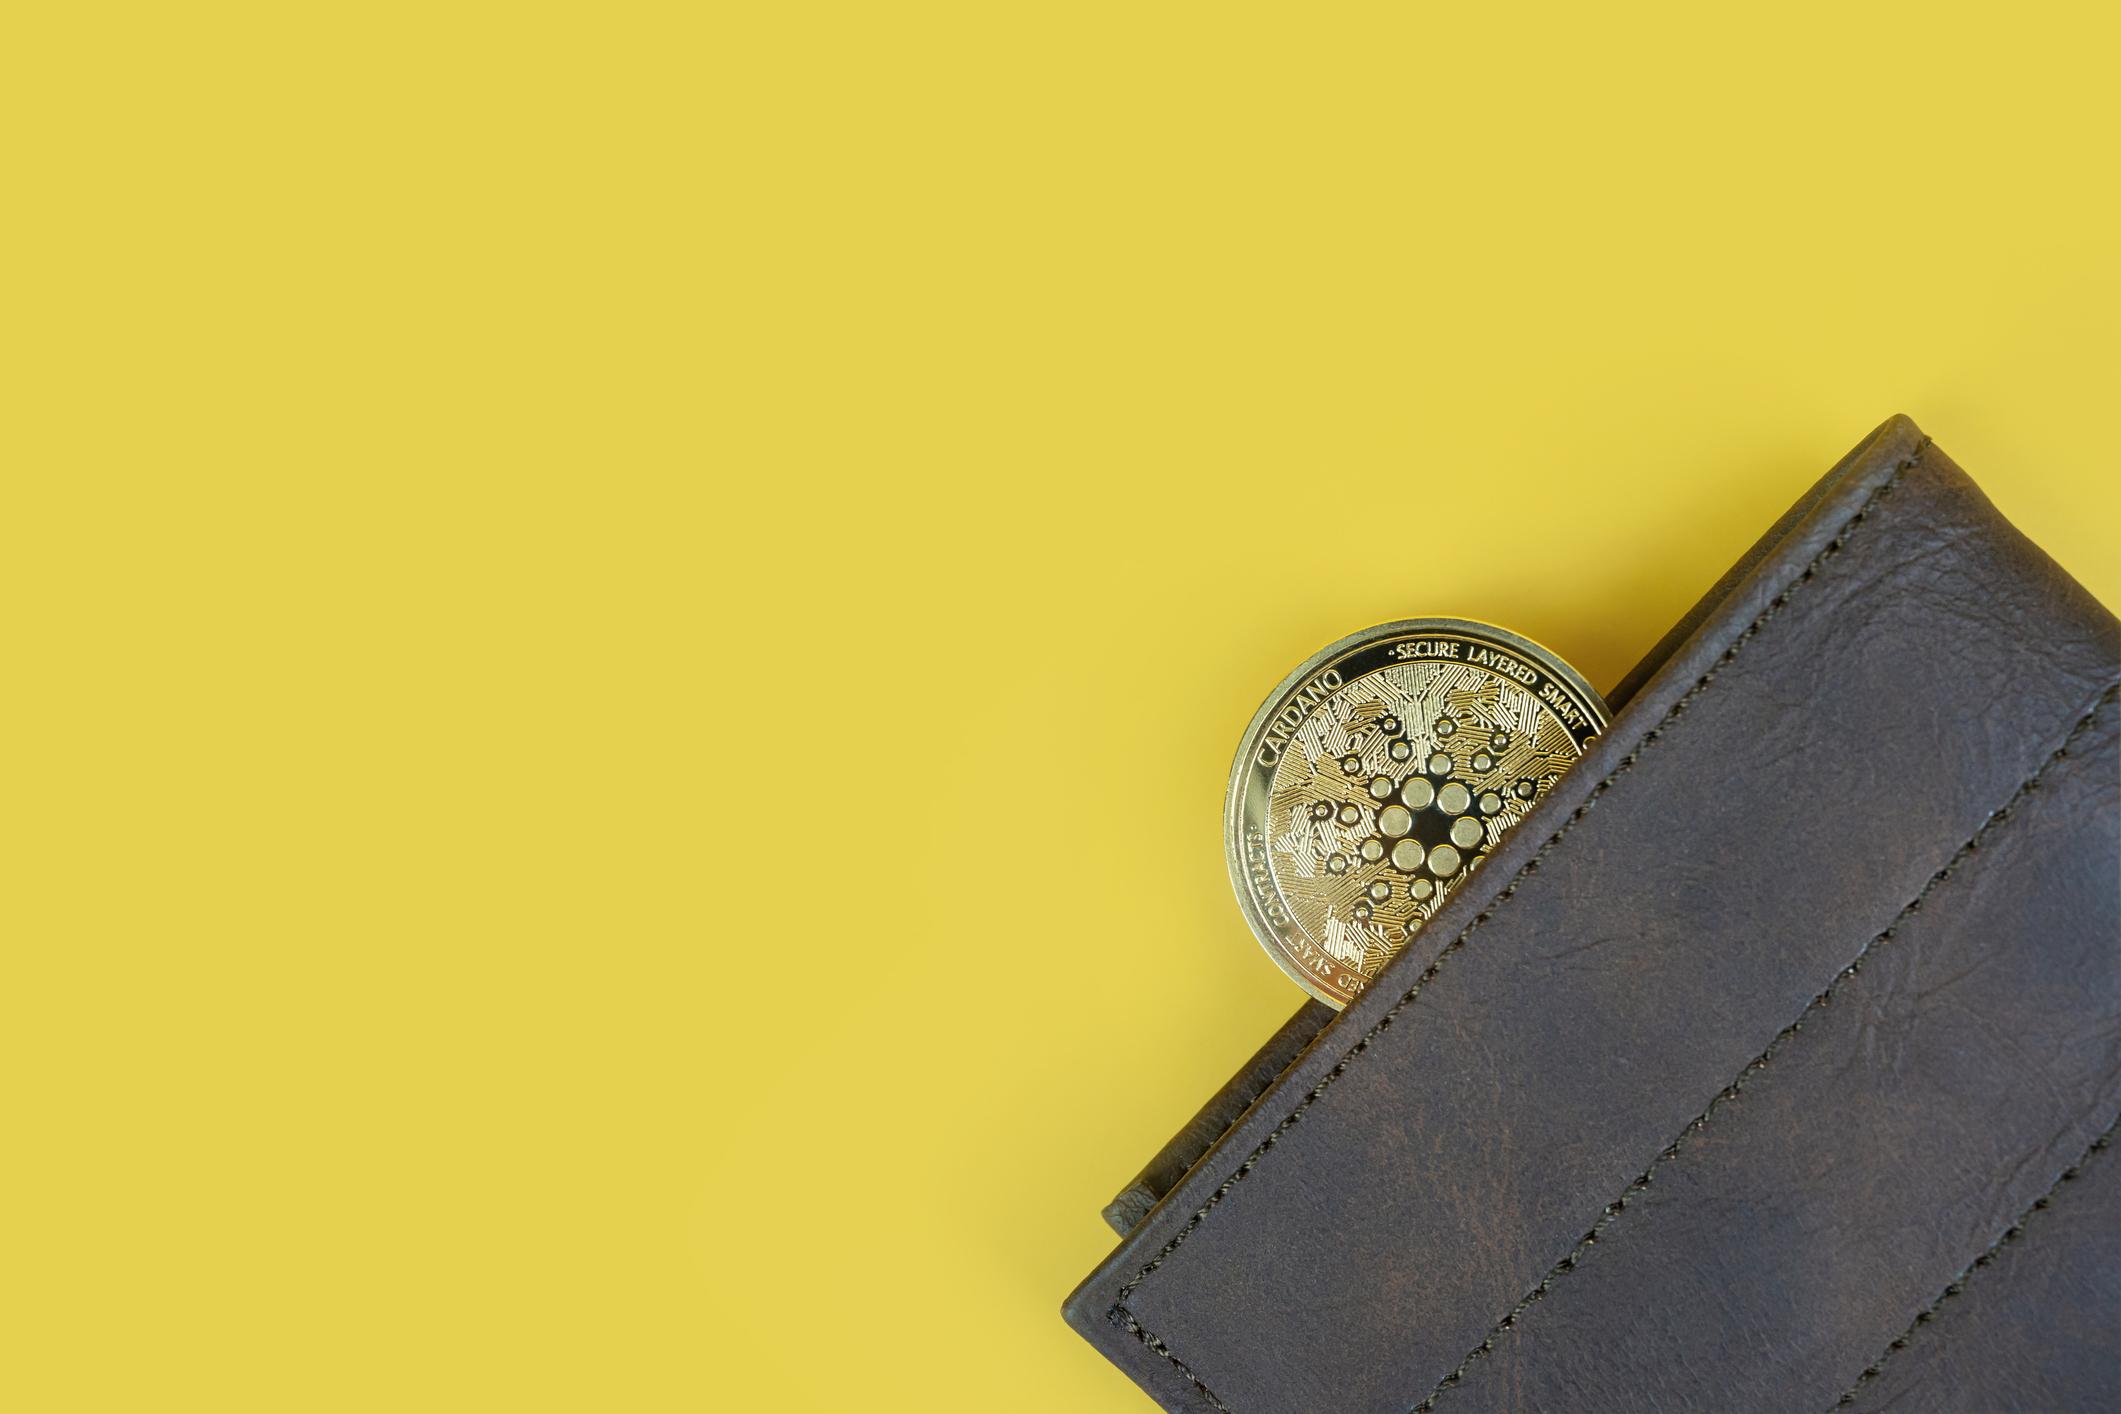 Cardano in a wallet on yellow background with copy space